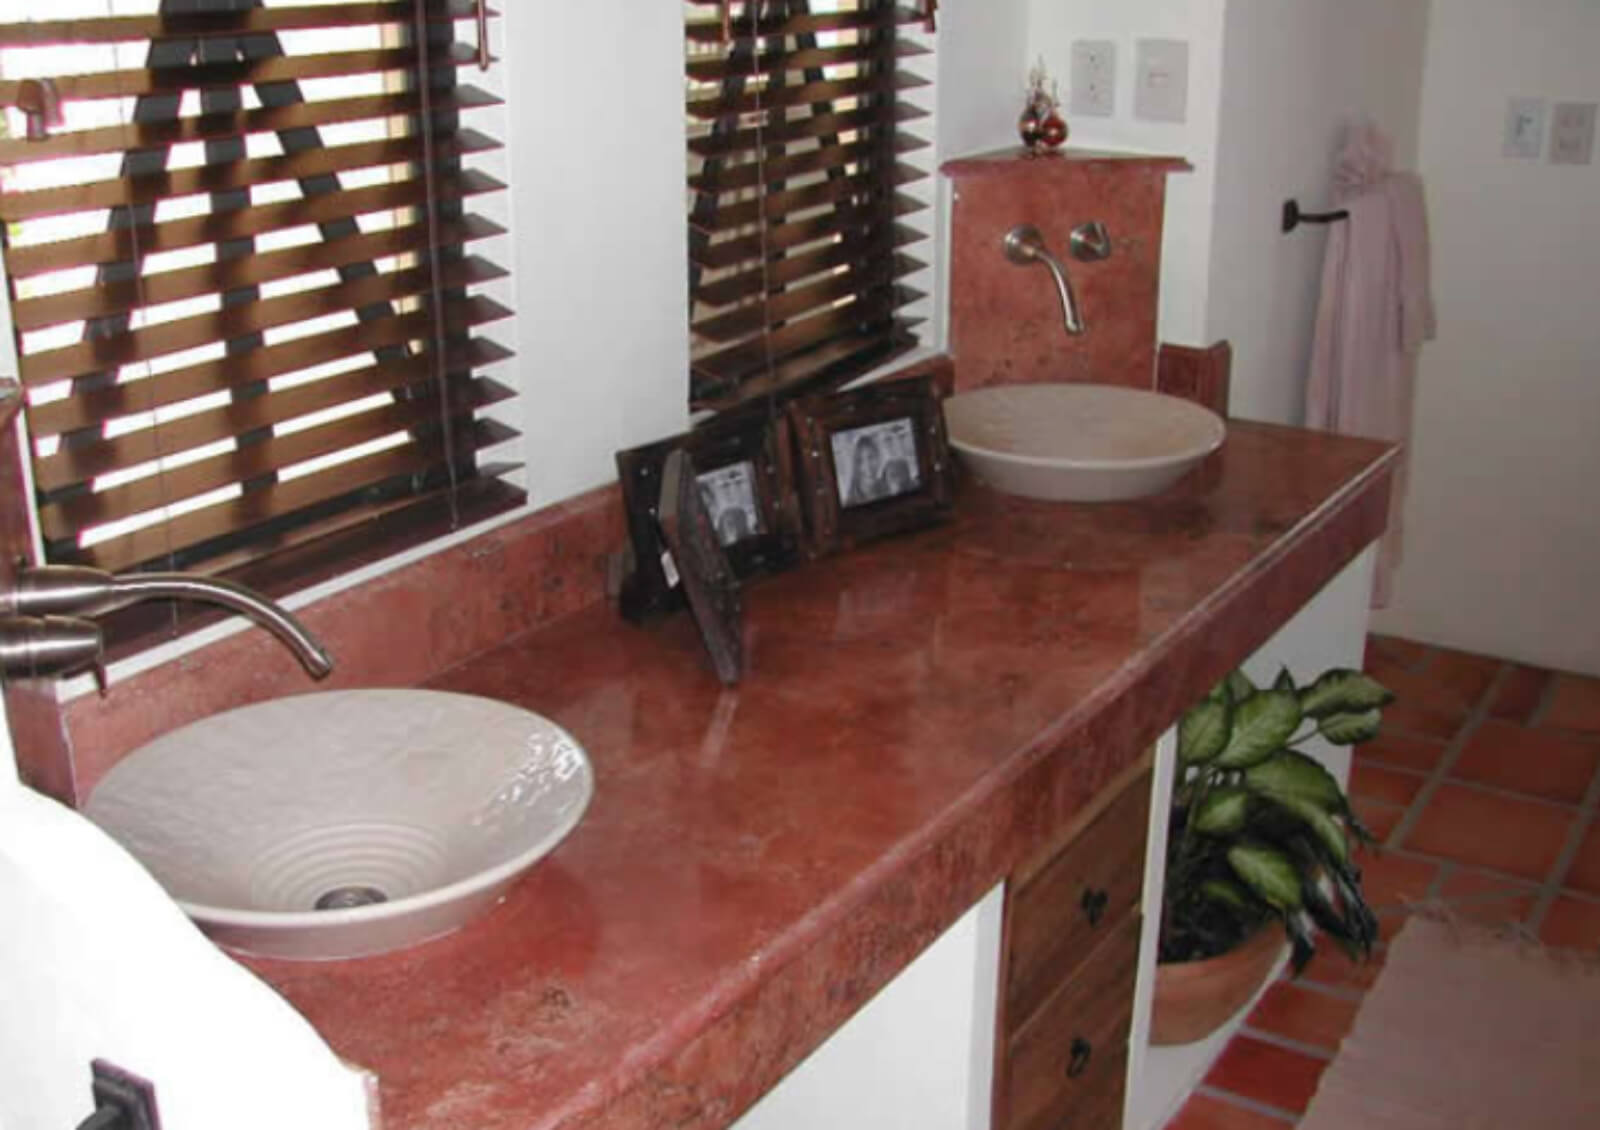 Ocean view house with garden and private pool, rustic design for sale in Residencial Conejos, Huatulco.